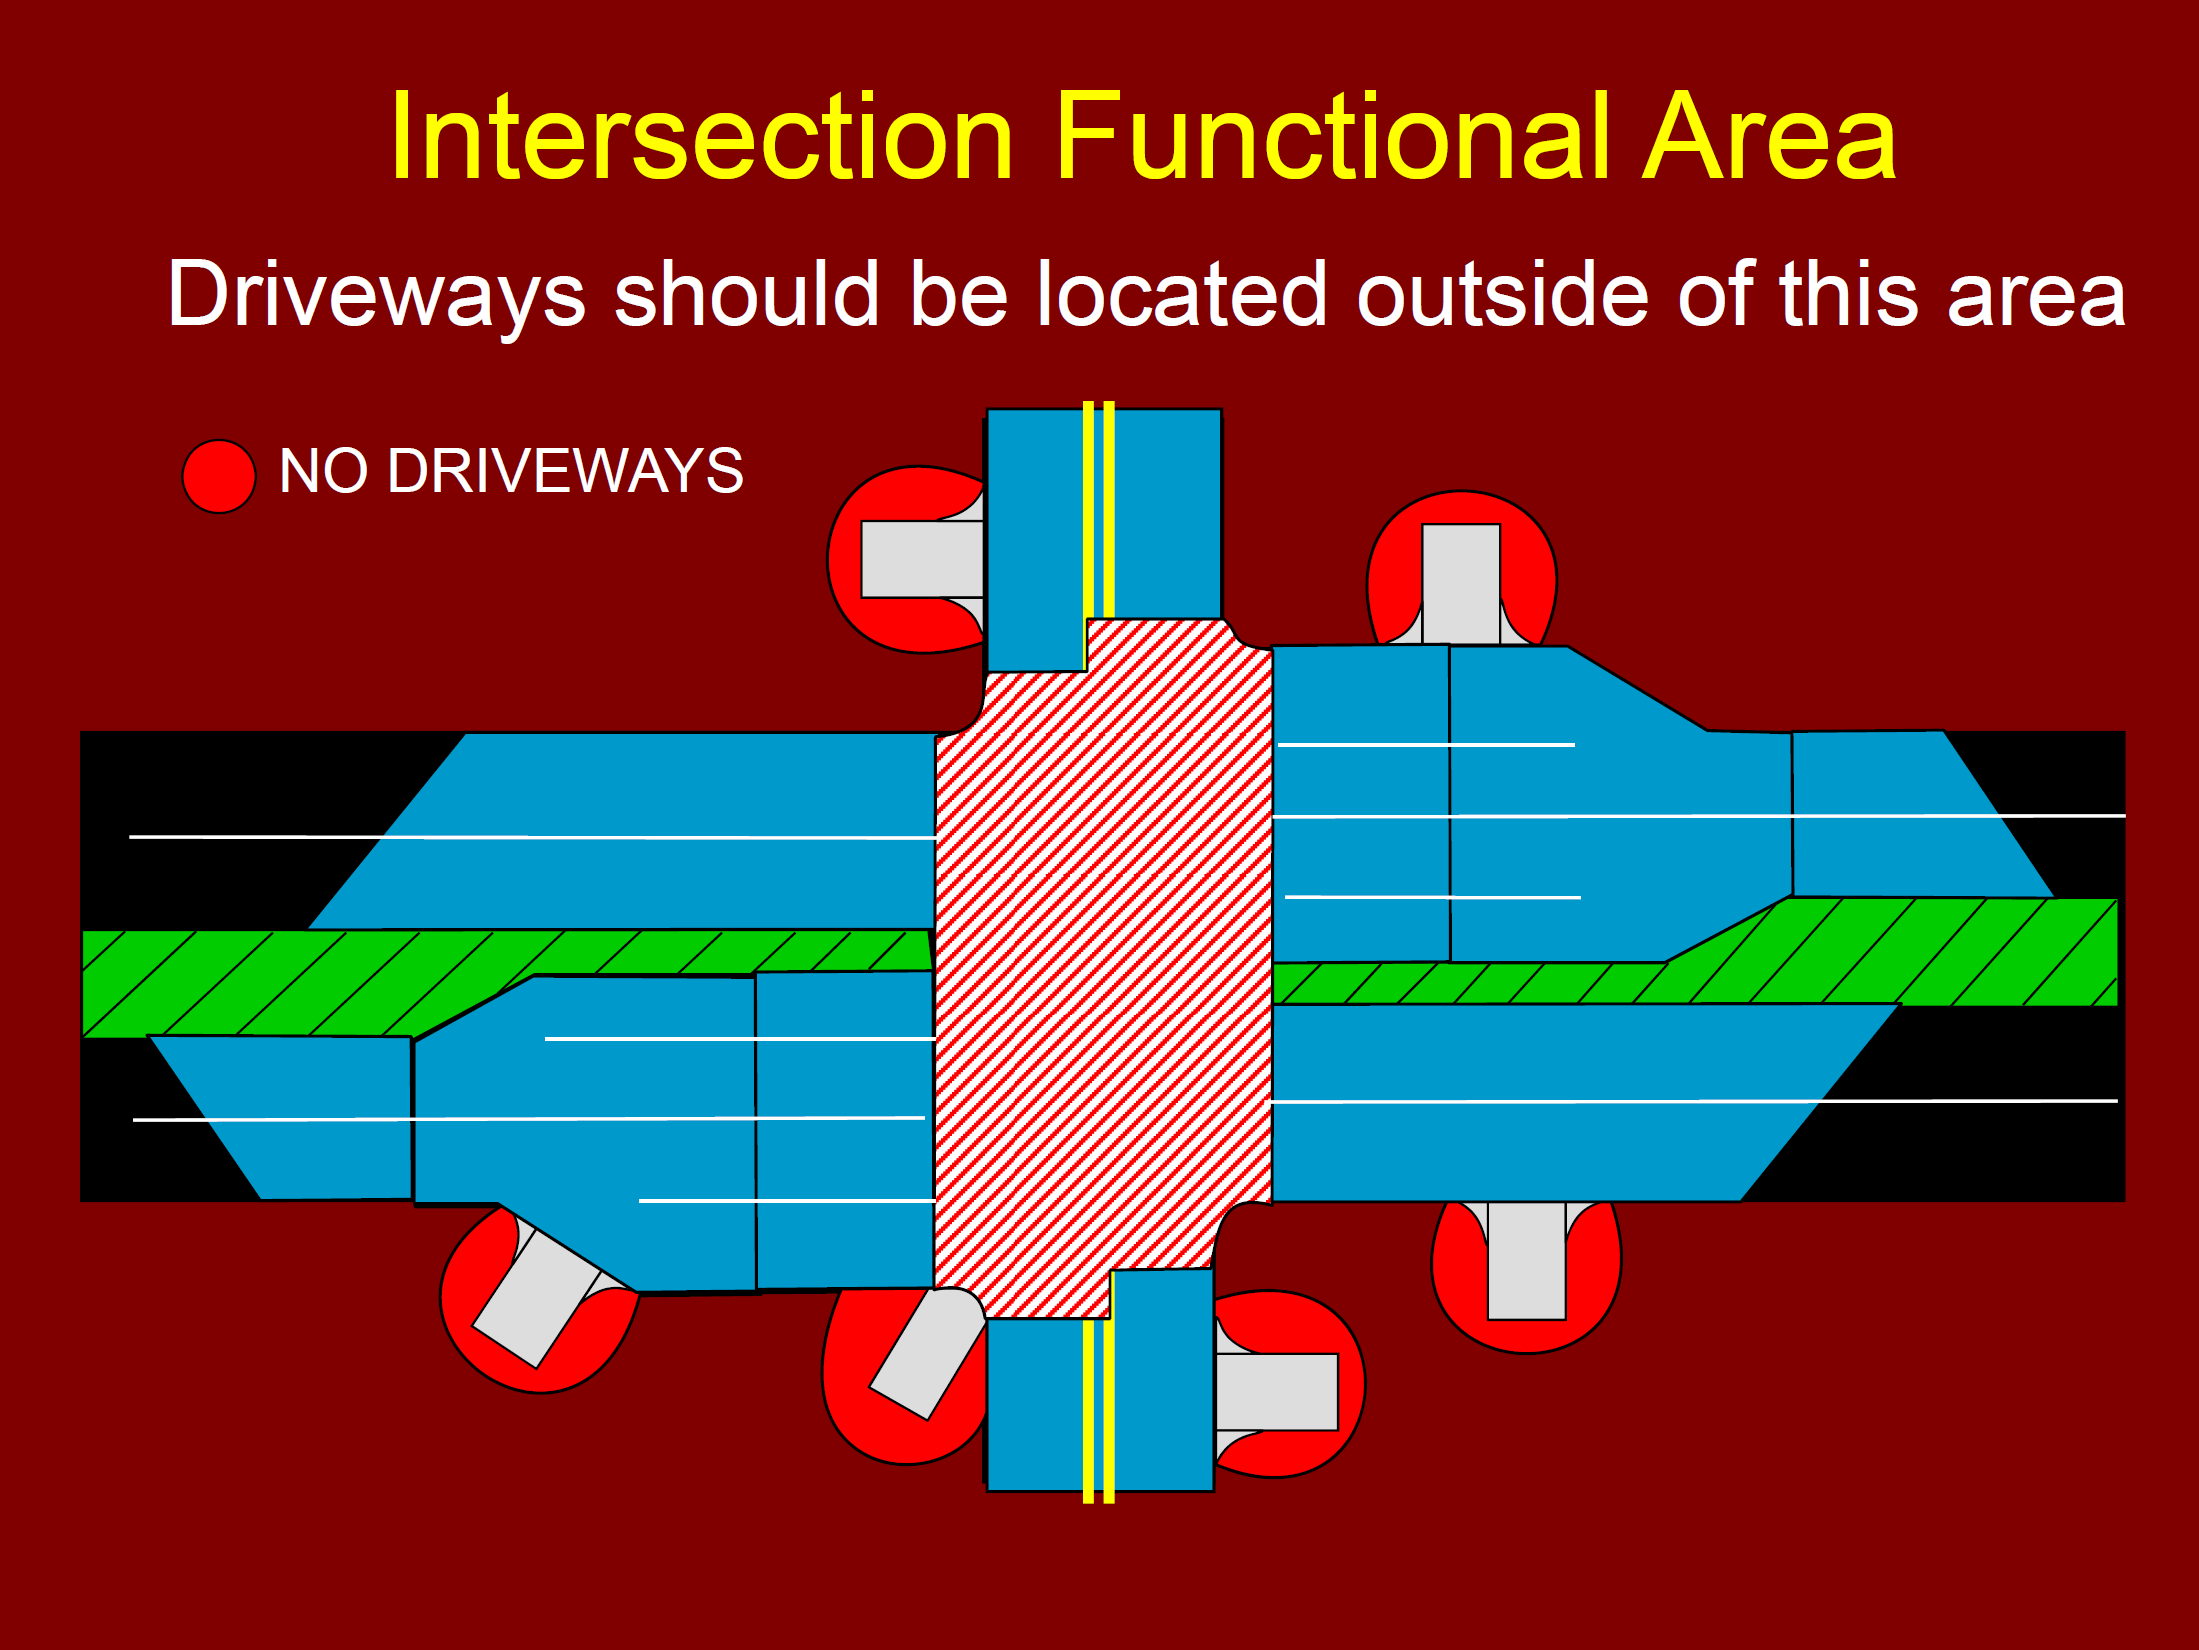 Intersection Functional Area - Driveways